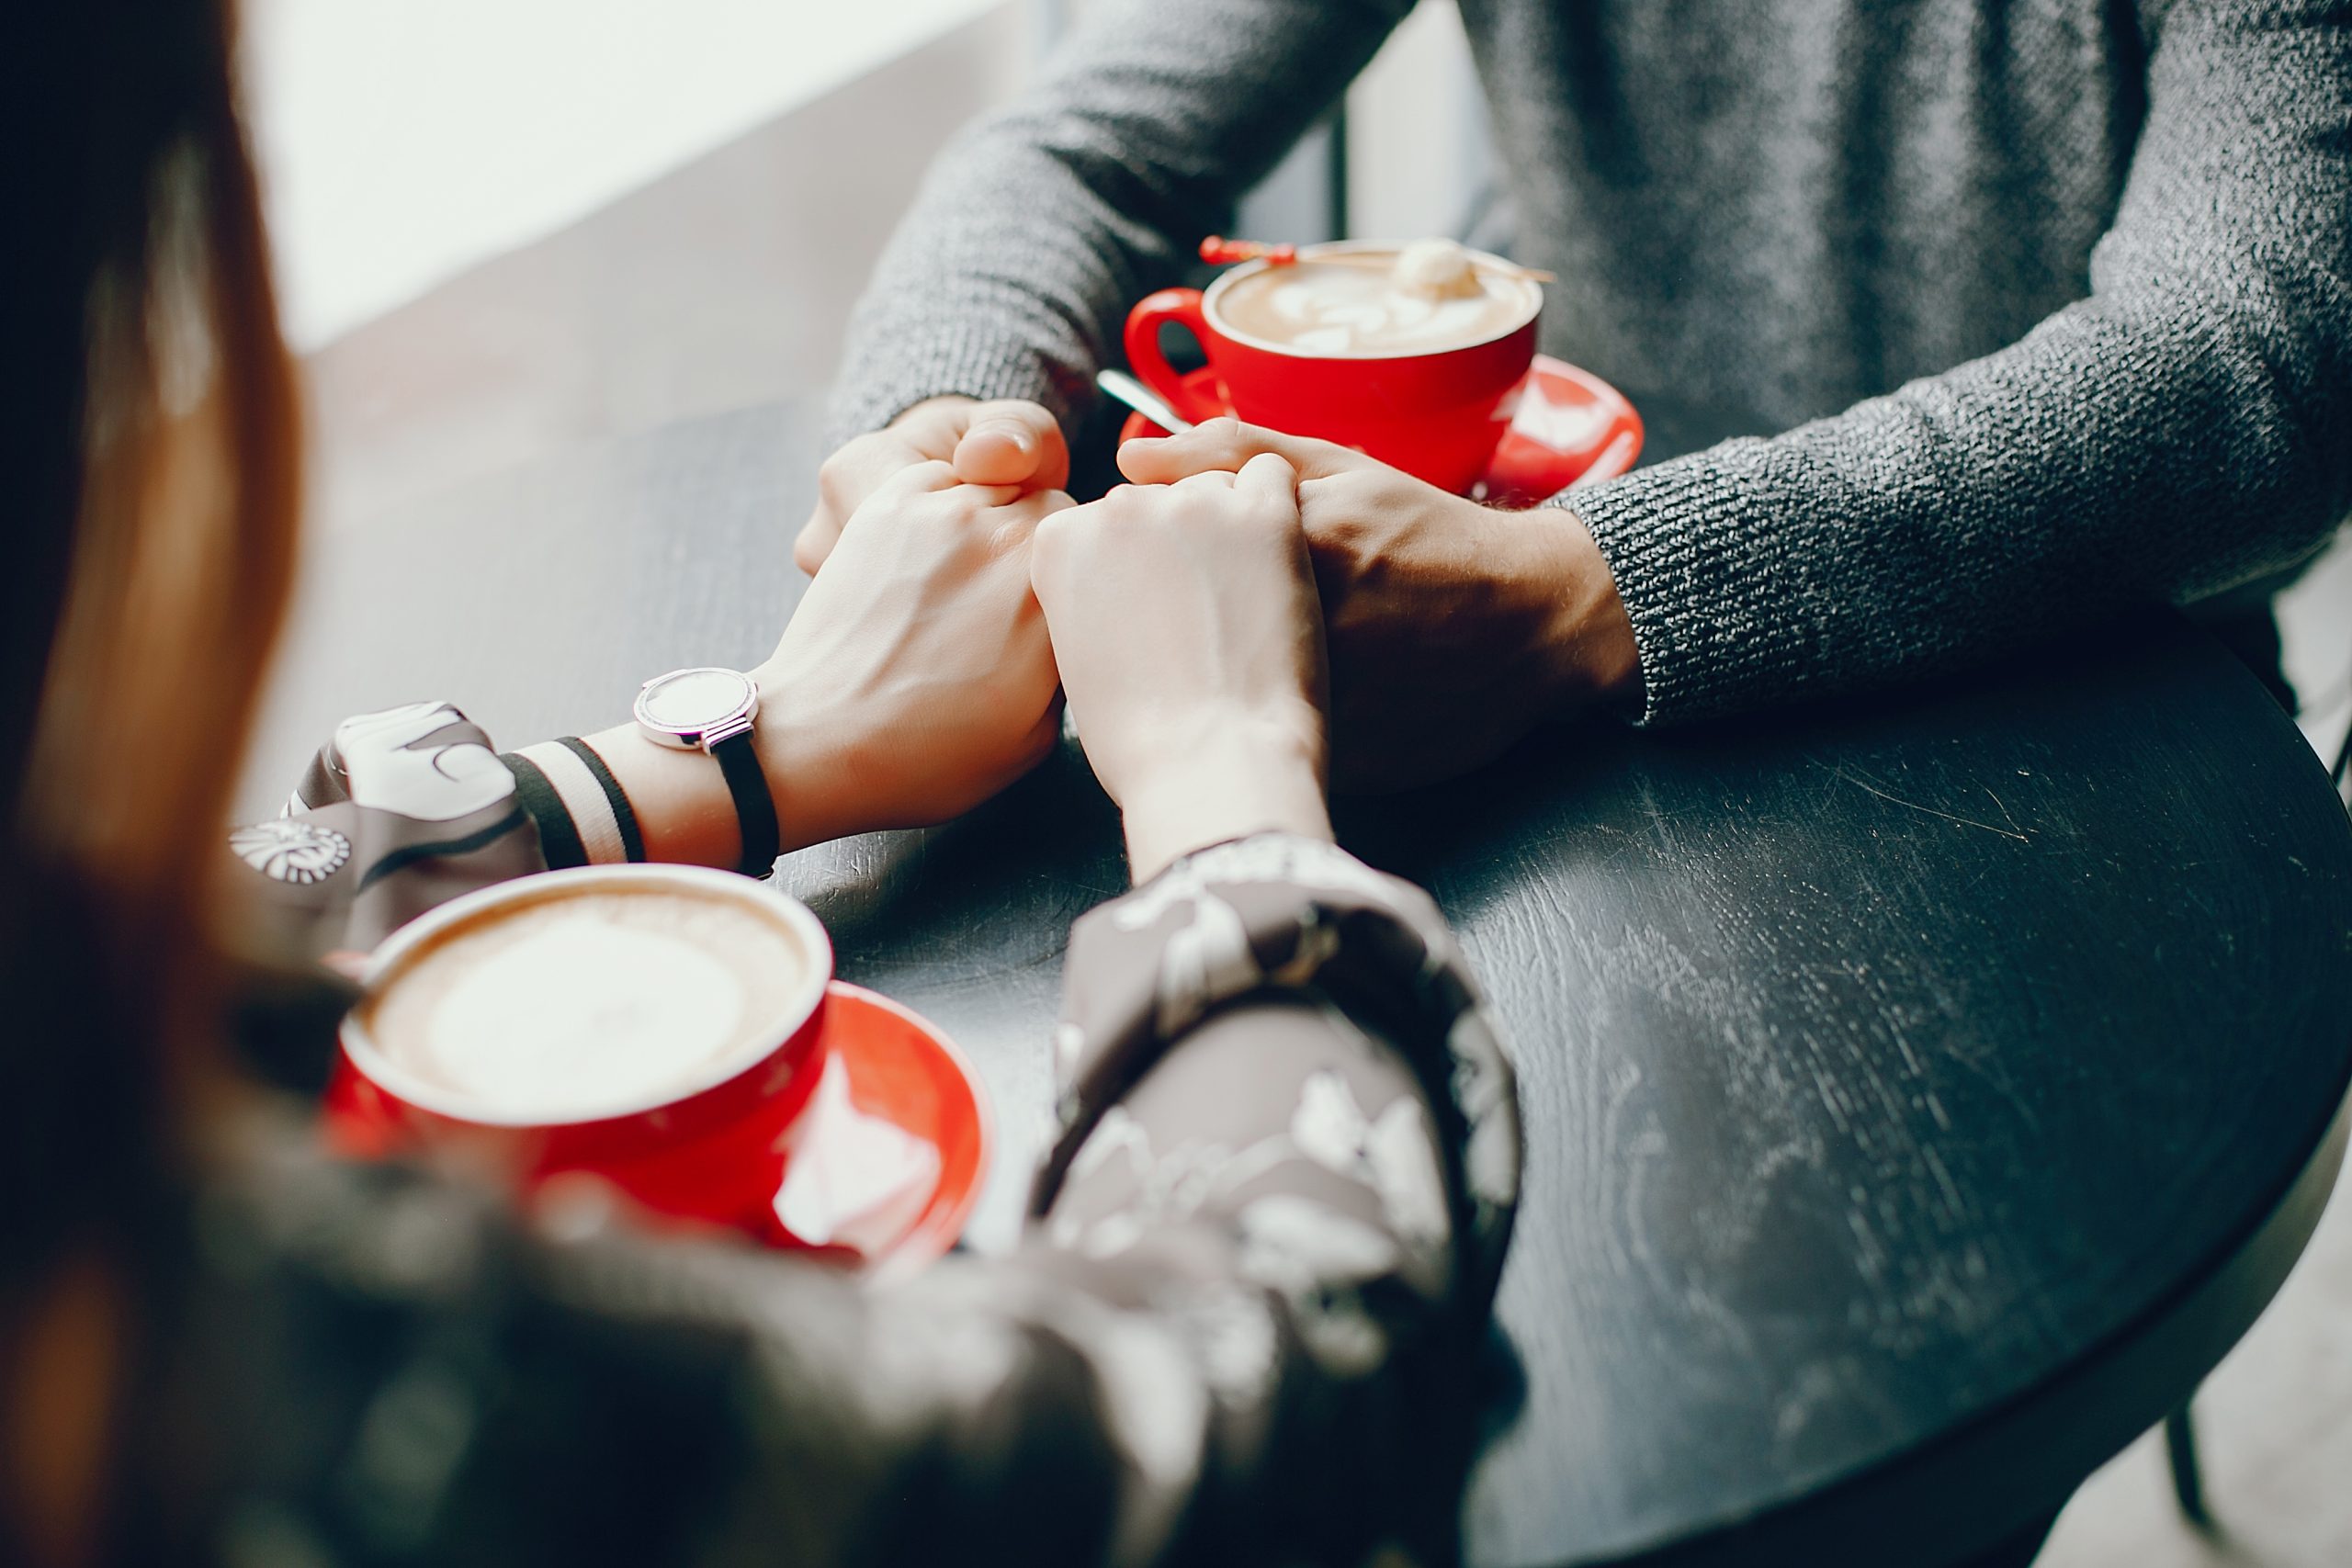 two people drinking a coffee out of red cups and holding hands